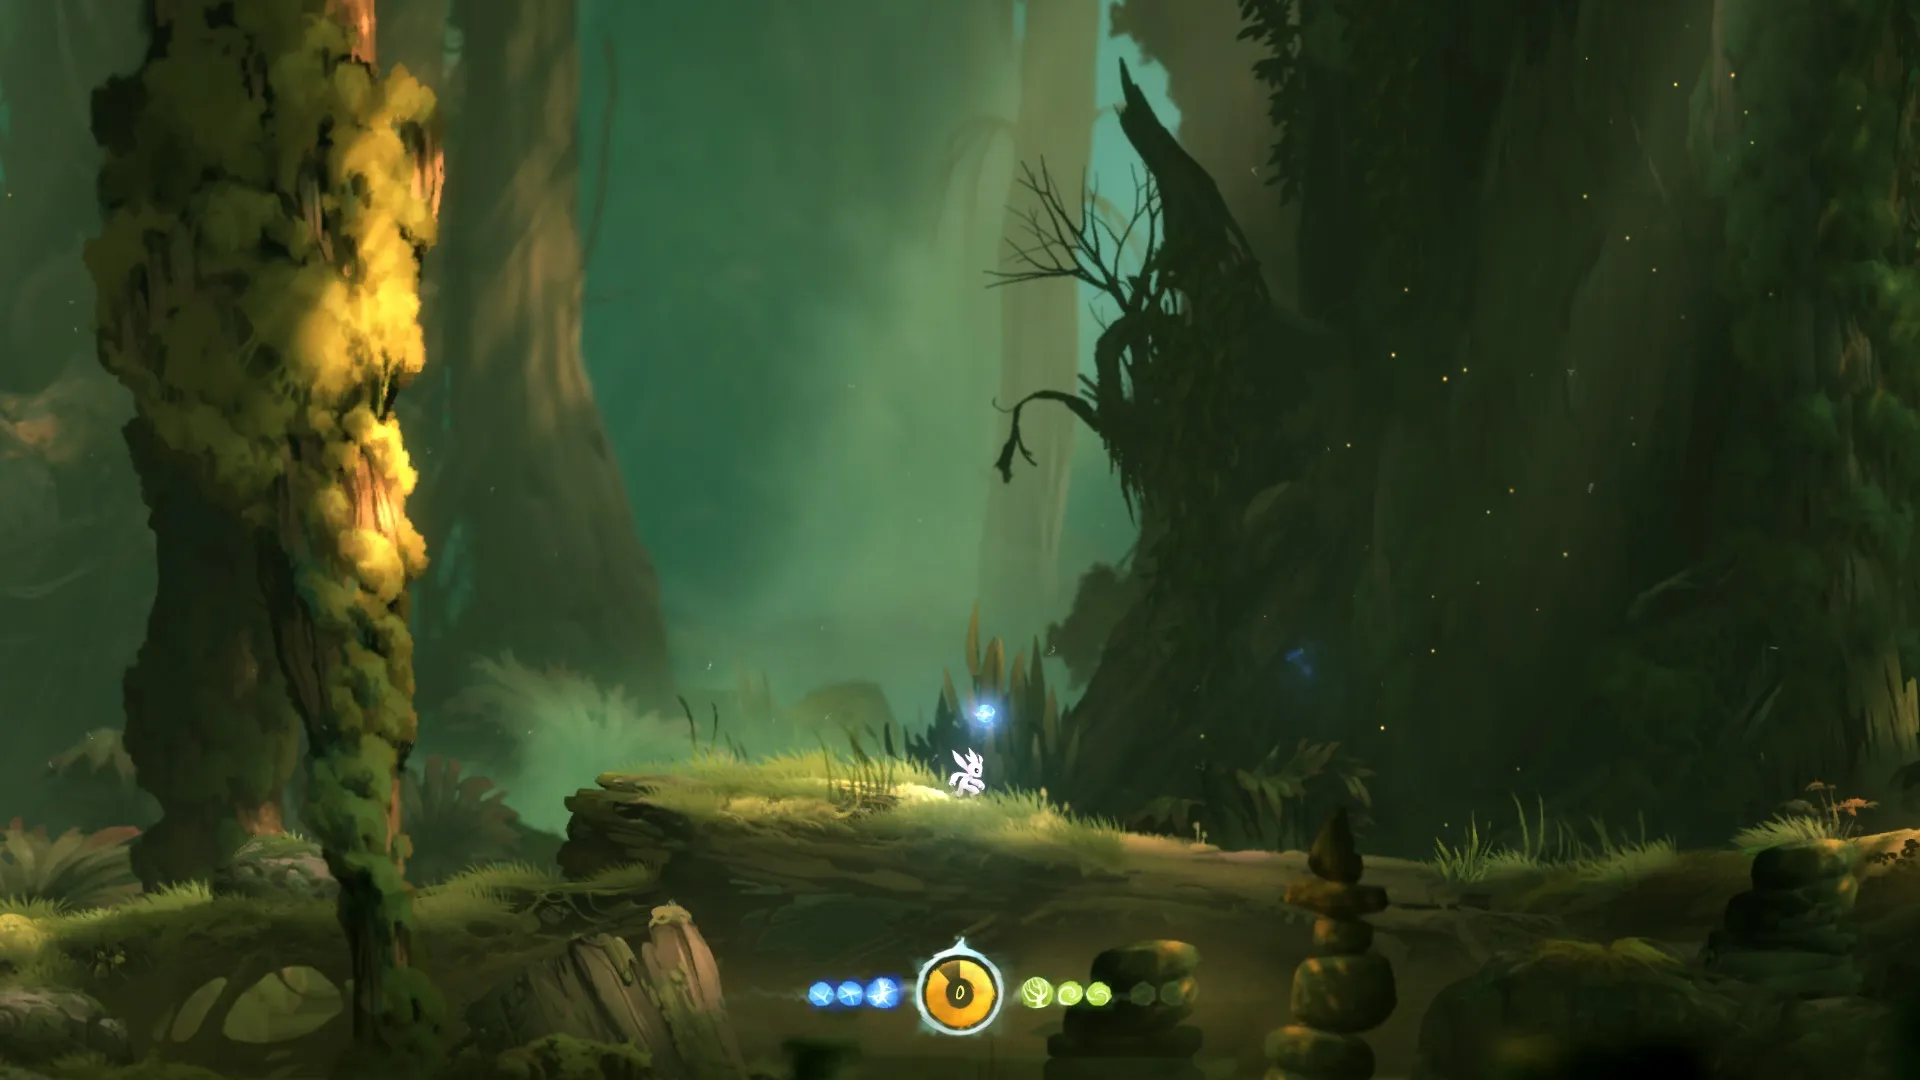 Ori and the Blind Forest